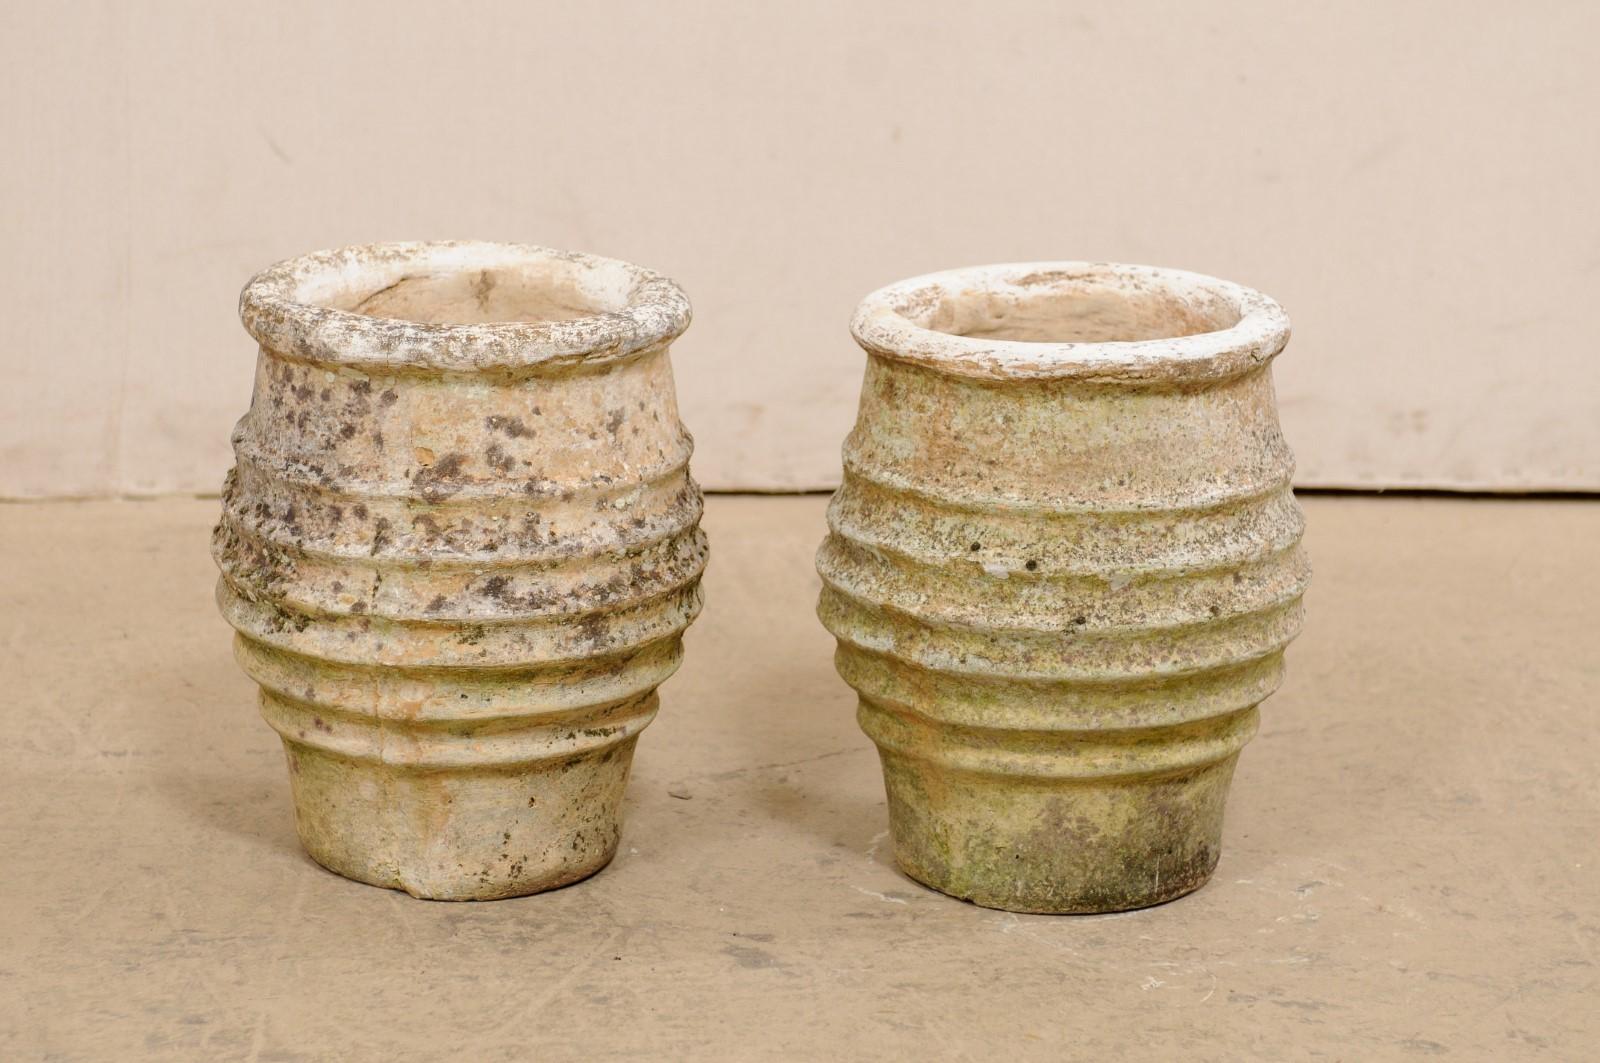 A Spanish pair of cast-stone pots from the 19th century. This pair of antique vessels from Spain, created from cast-stone, are round-shaped, with a thick and pronounced lip at top, a nicely ribbed texture around the perimeter of their bodies, and